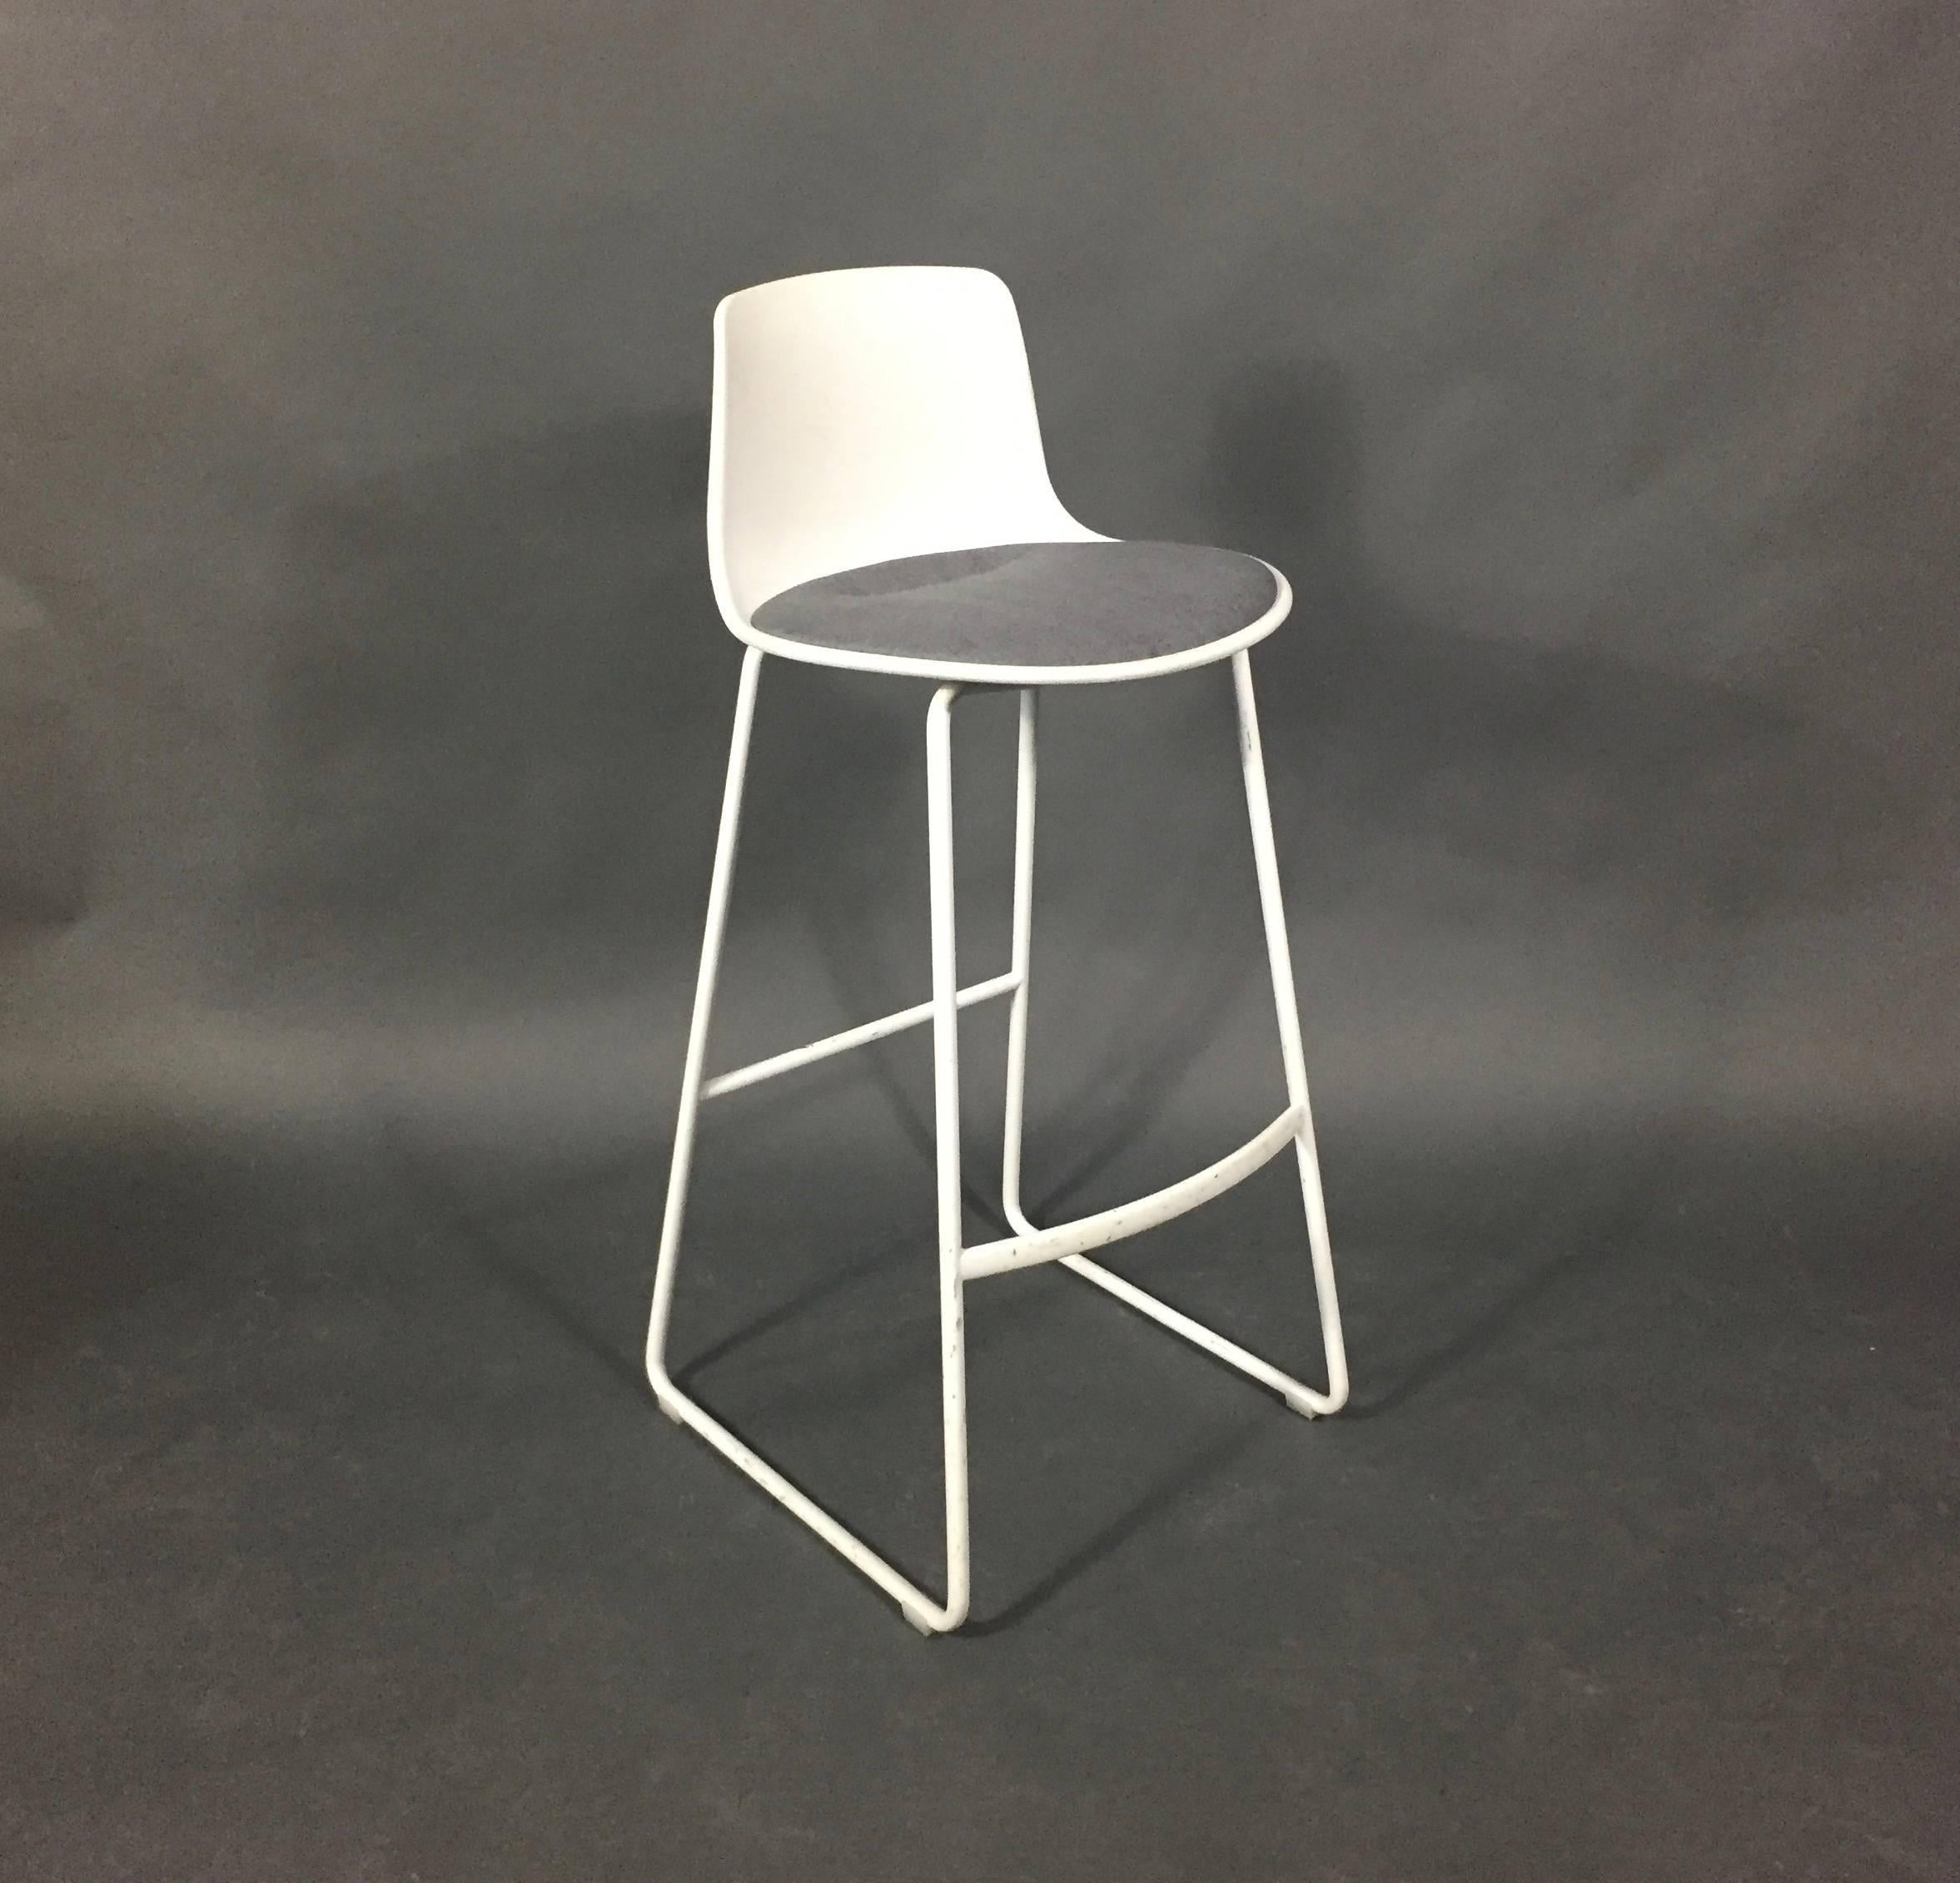 Enea Lotus Bar Stools by Lievore Altherr Molina, Spain In Good Condition For Sale In Hudson, NY